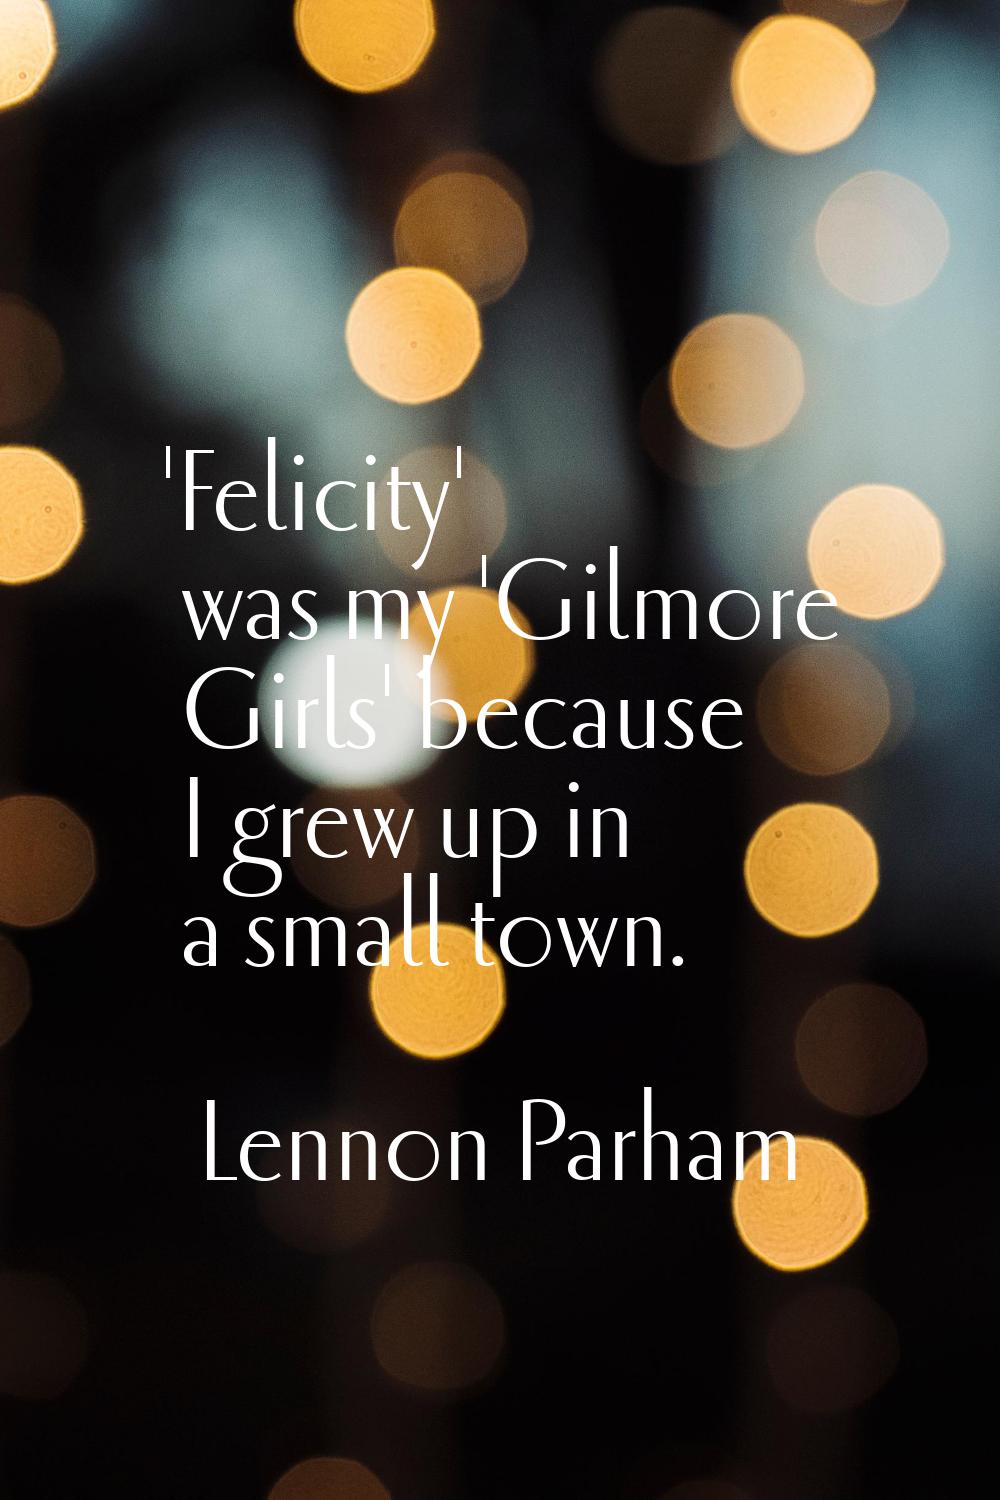 'Felicity' was my 'Gilmore Girls' because I grew up in a small town.